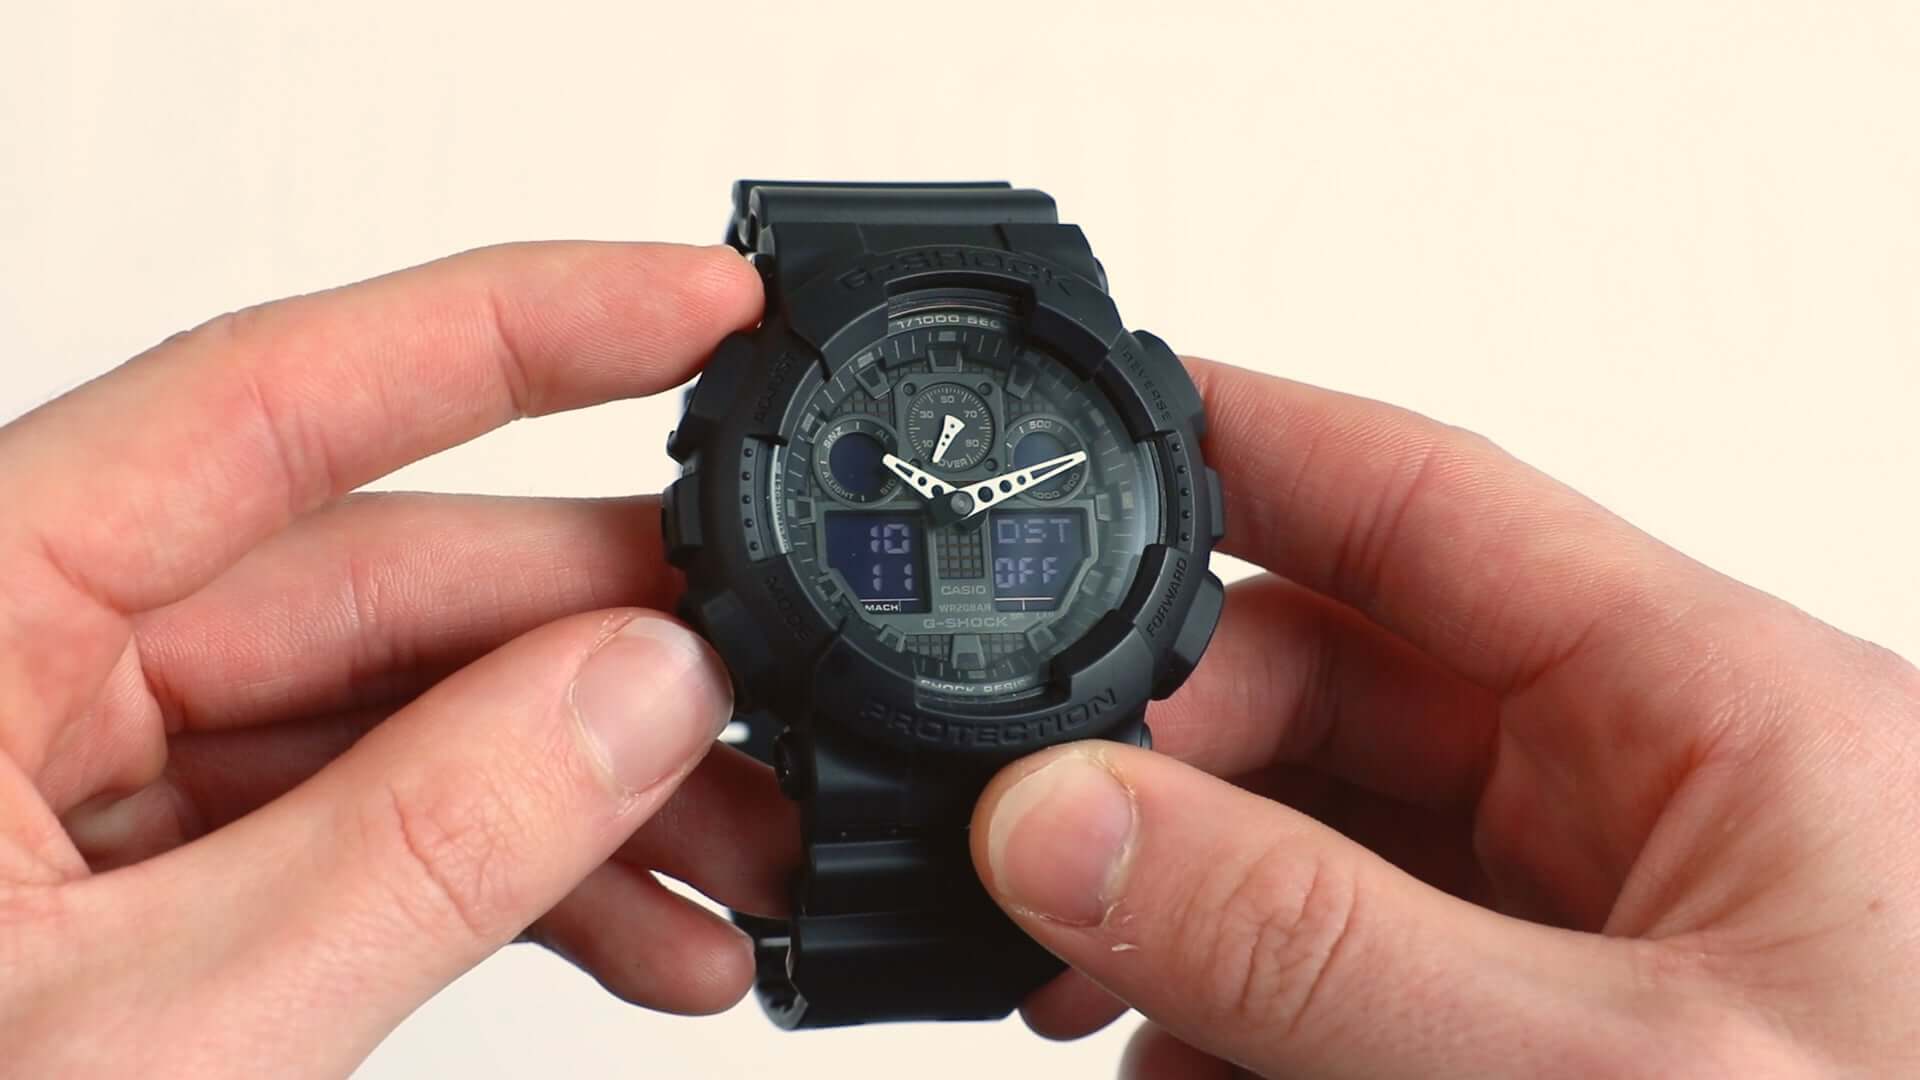 How To Set Date On G-Shock Watch